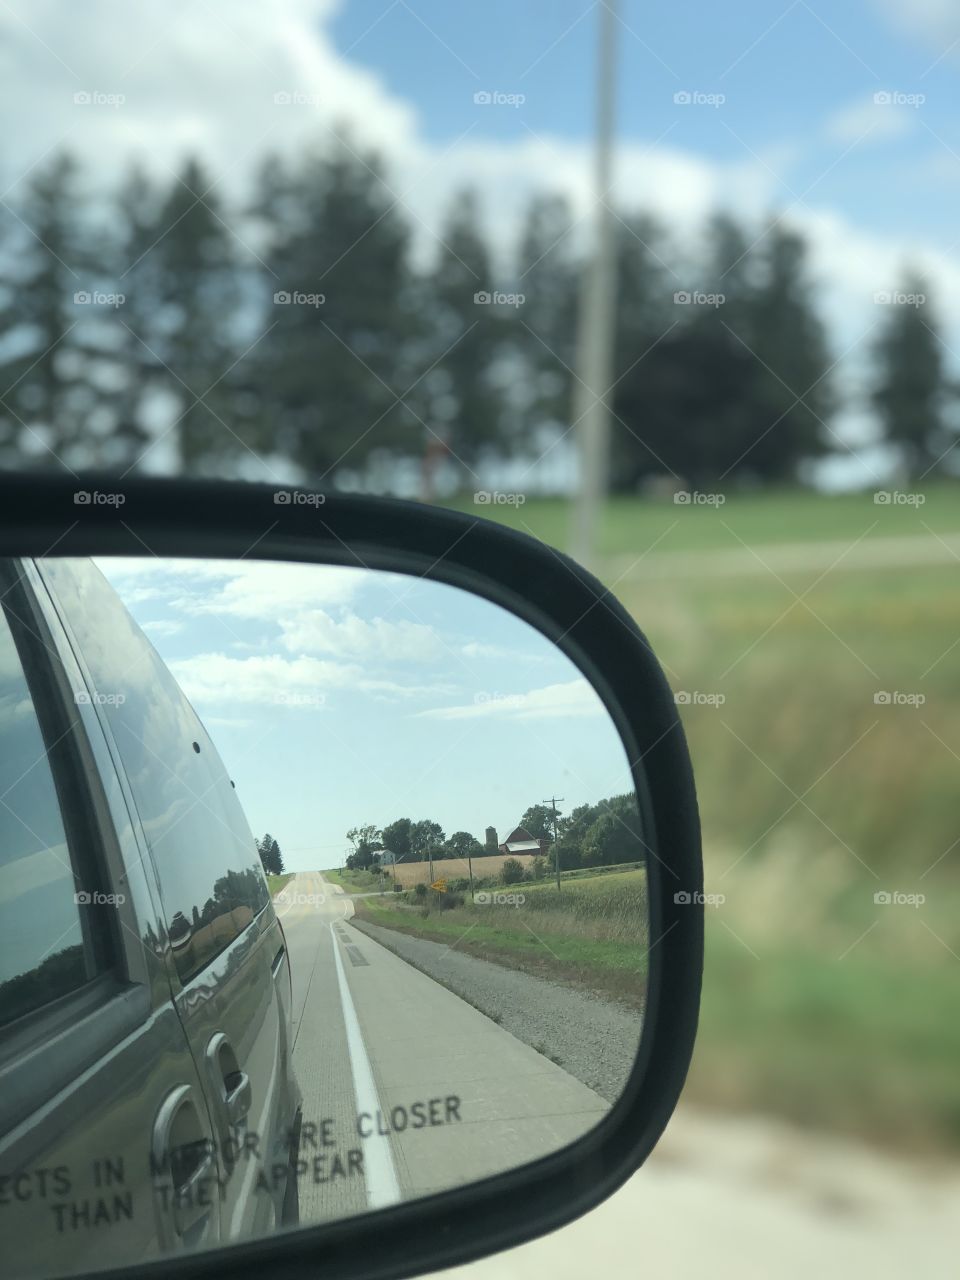 Objects in the Mirror.